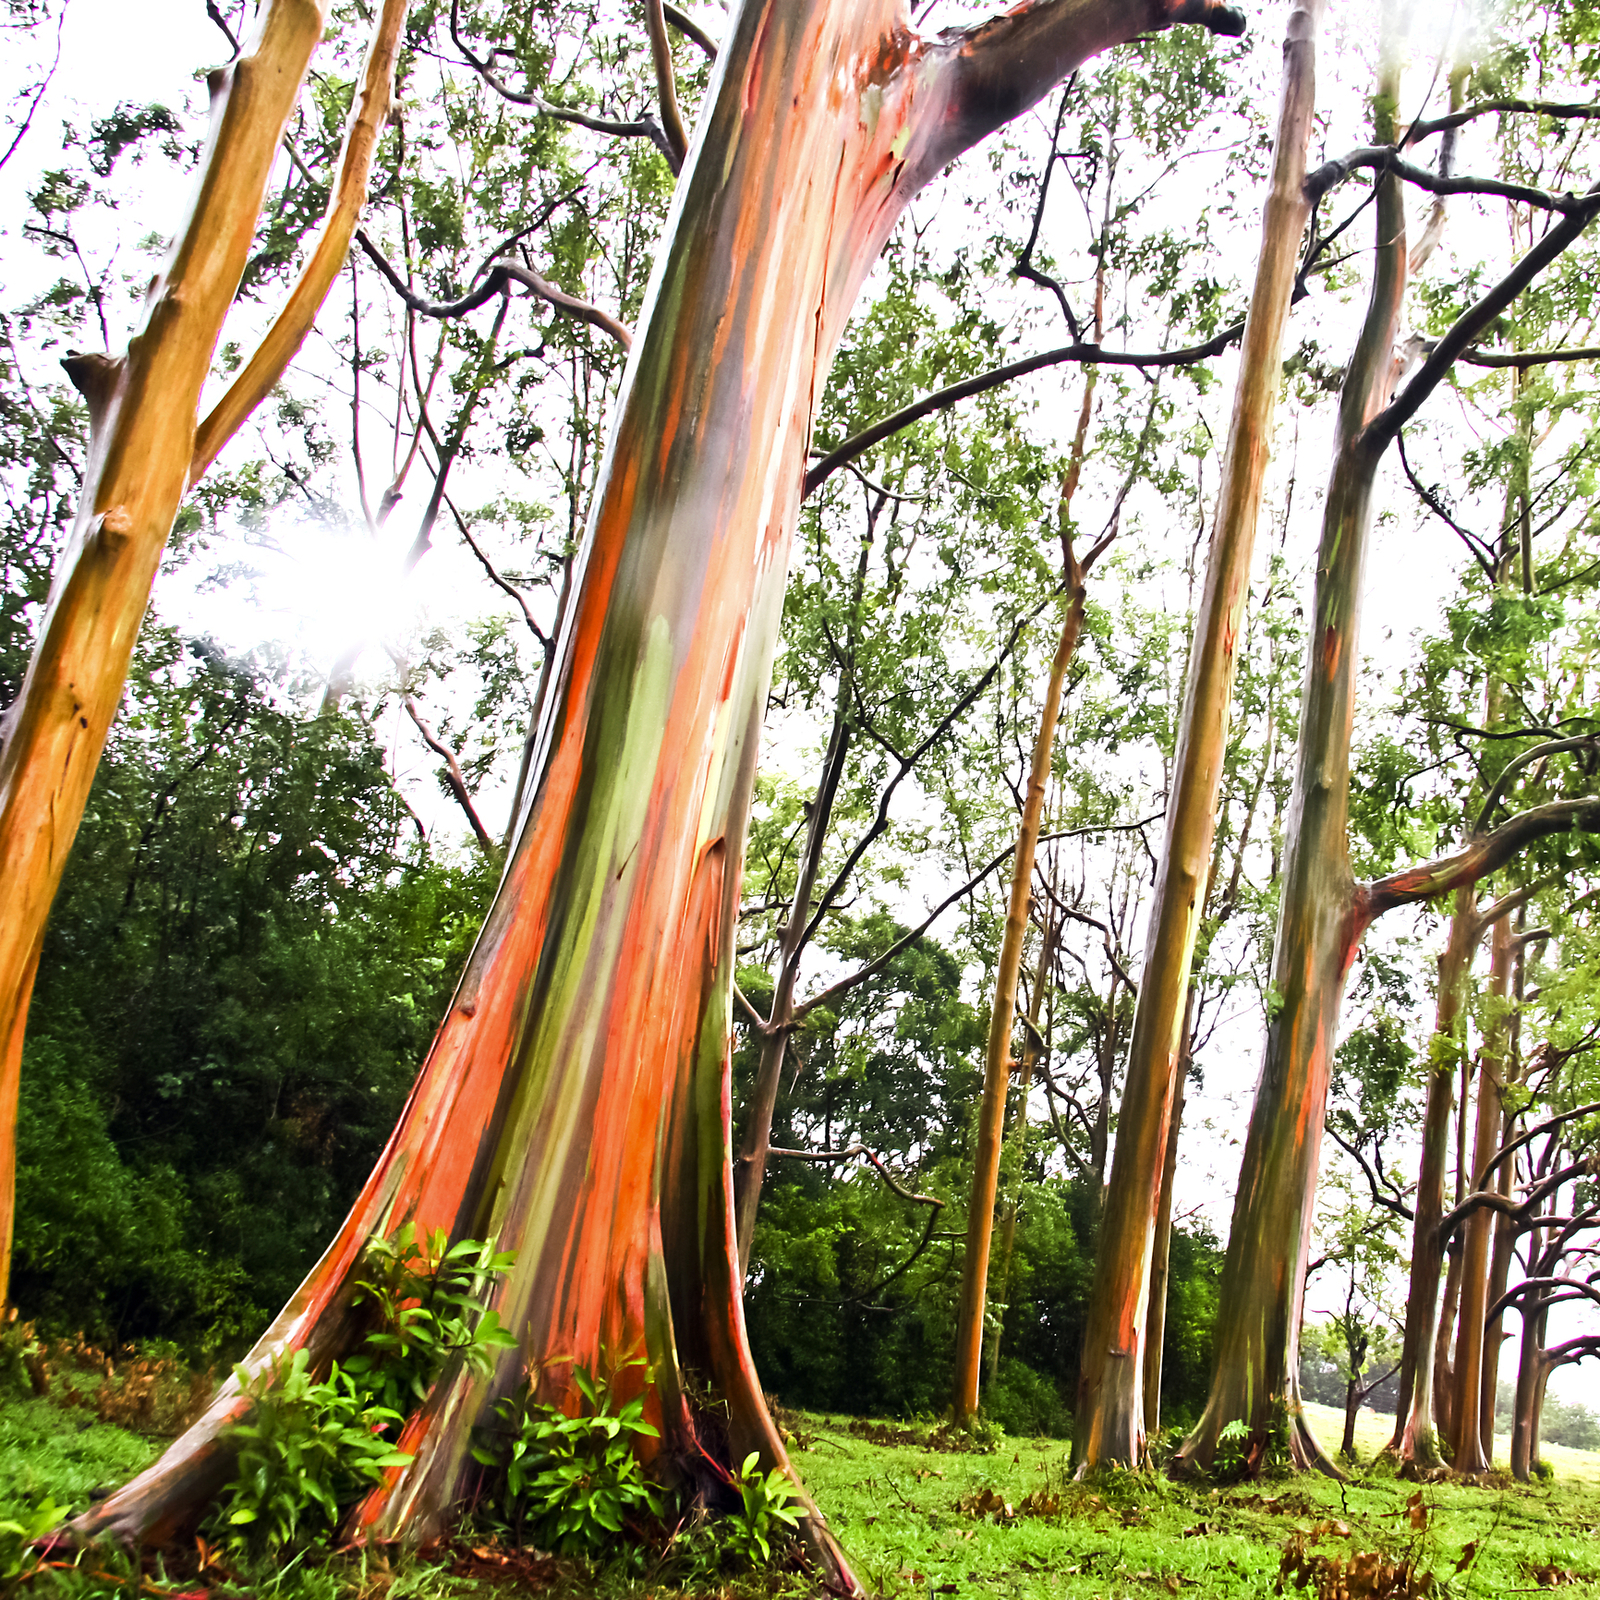 A stand of rainbow eucalyptus trees. Image Credit: © RightFramePhotoVideo | Dreamstime.com.